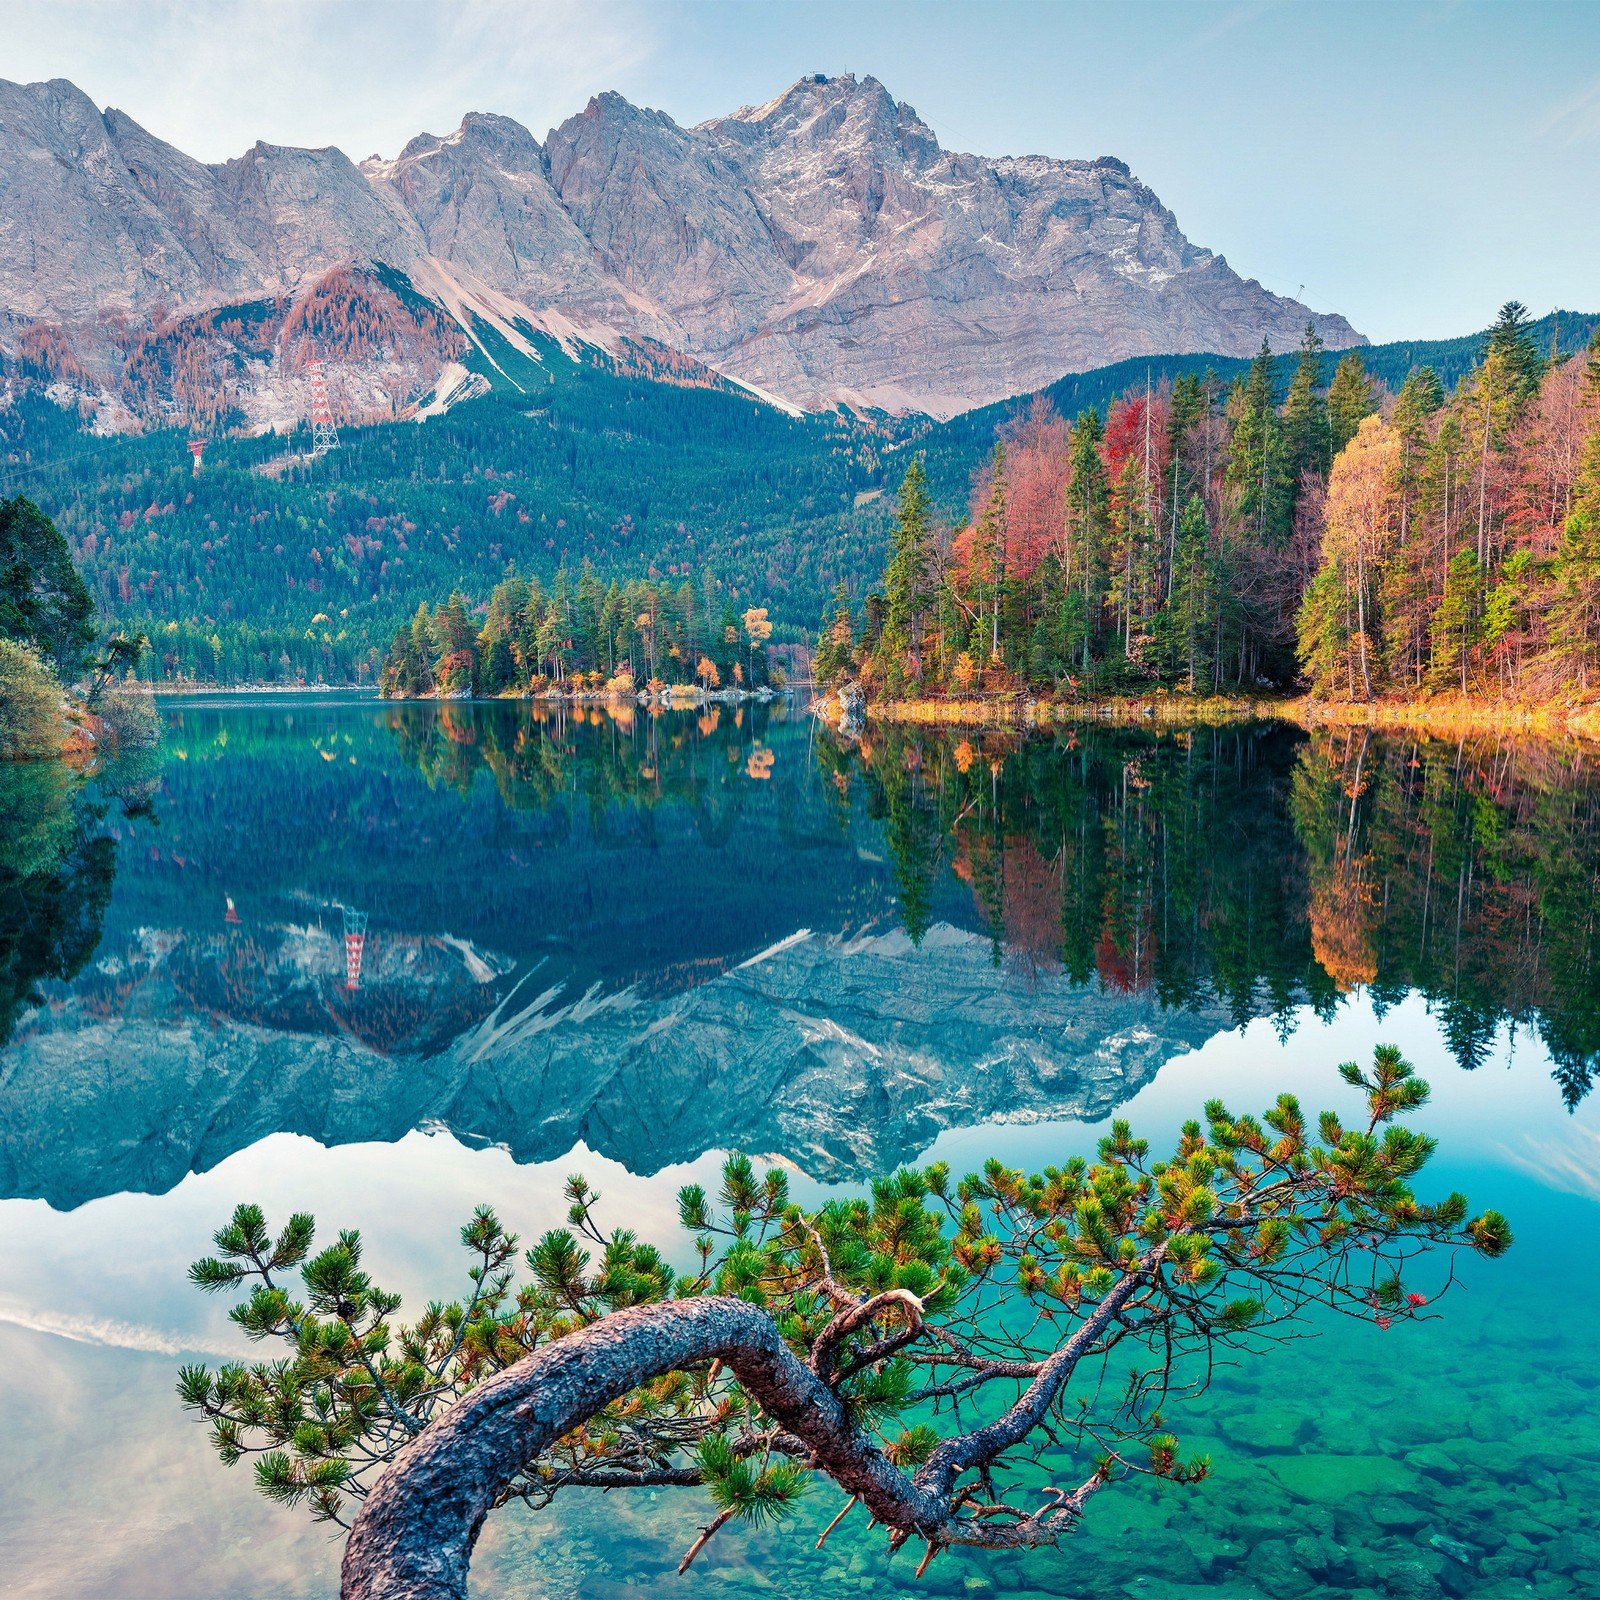 Fotomurale in TNT: Autunno a Eibsee - 416x254 cm